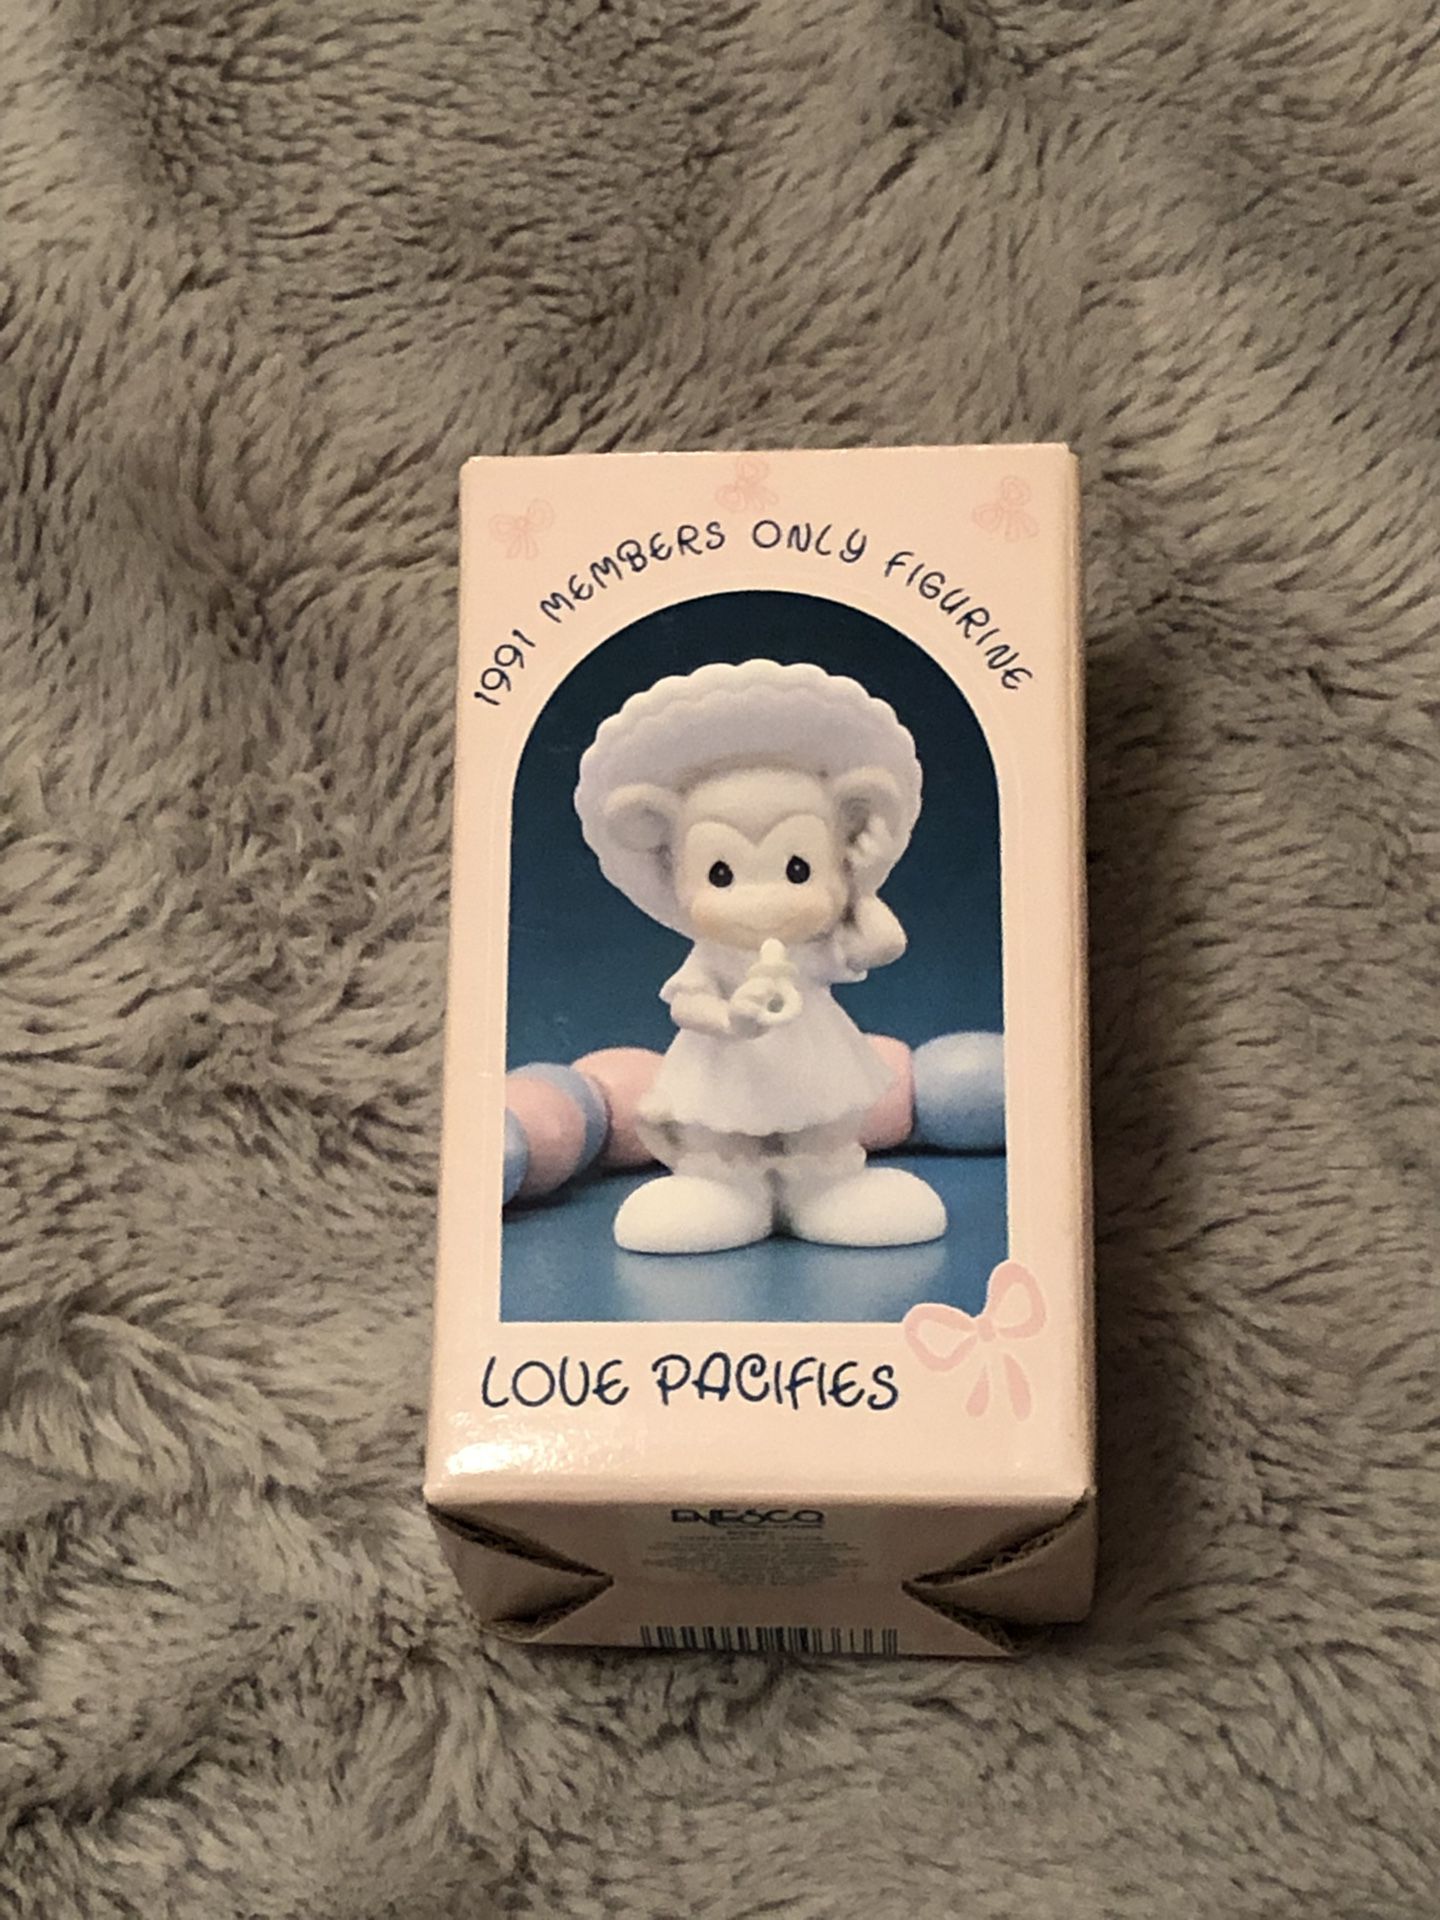 1991 “Love Pacifies” Precious Moments Collection Figurine